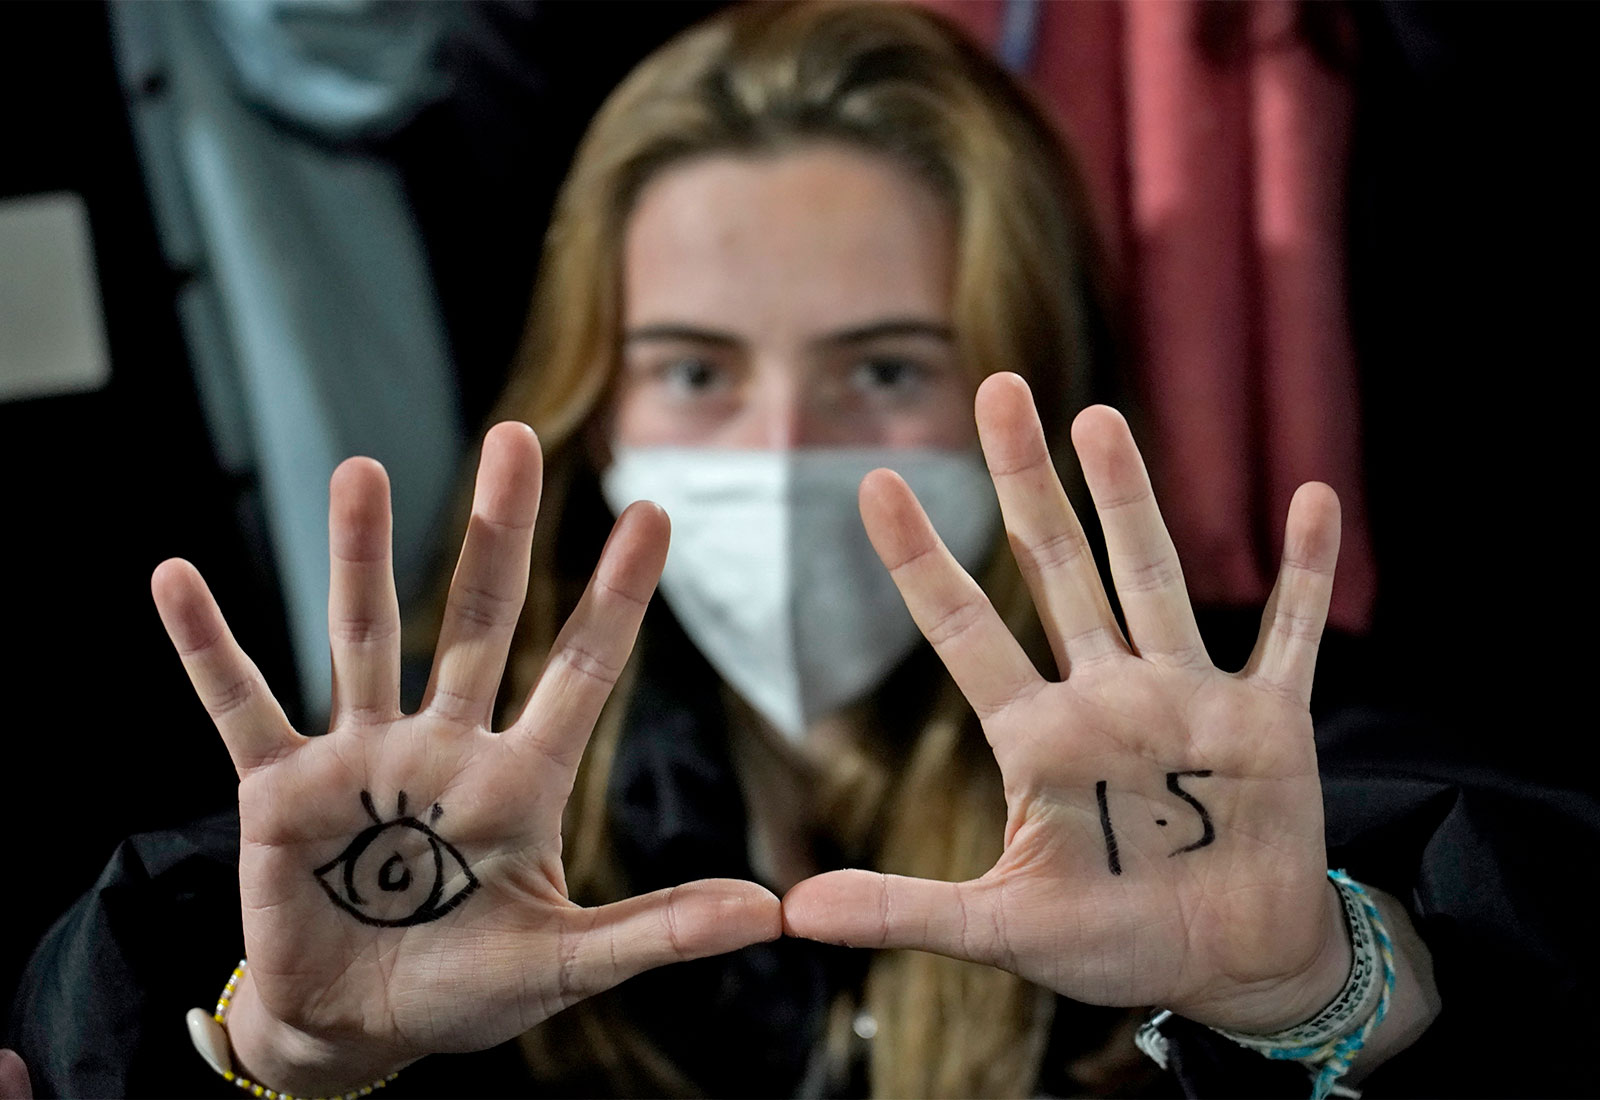 woman wearing mask looking at camera holding up her hands to show an eye drawn on her left palm and 1.5 written on her right palm in black marker